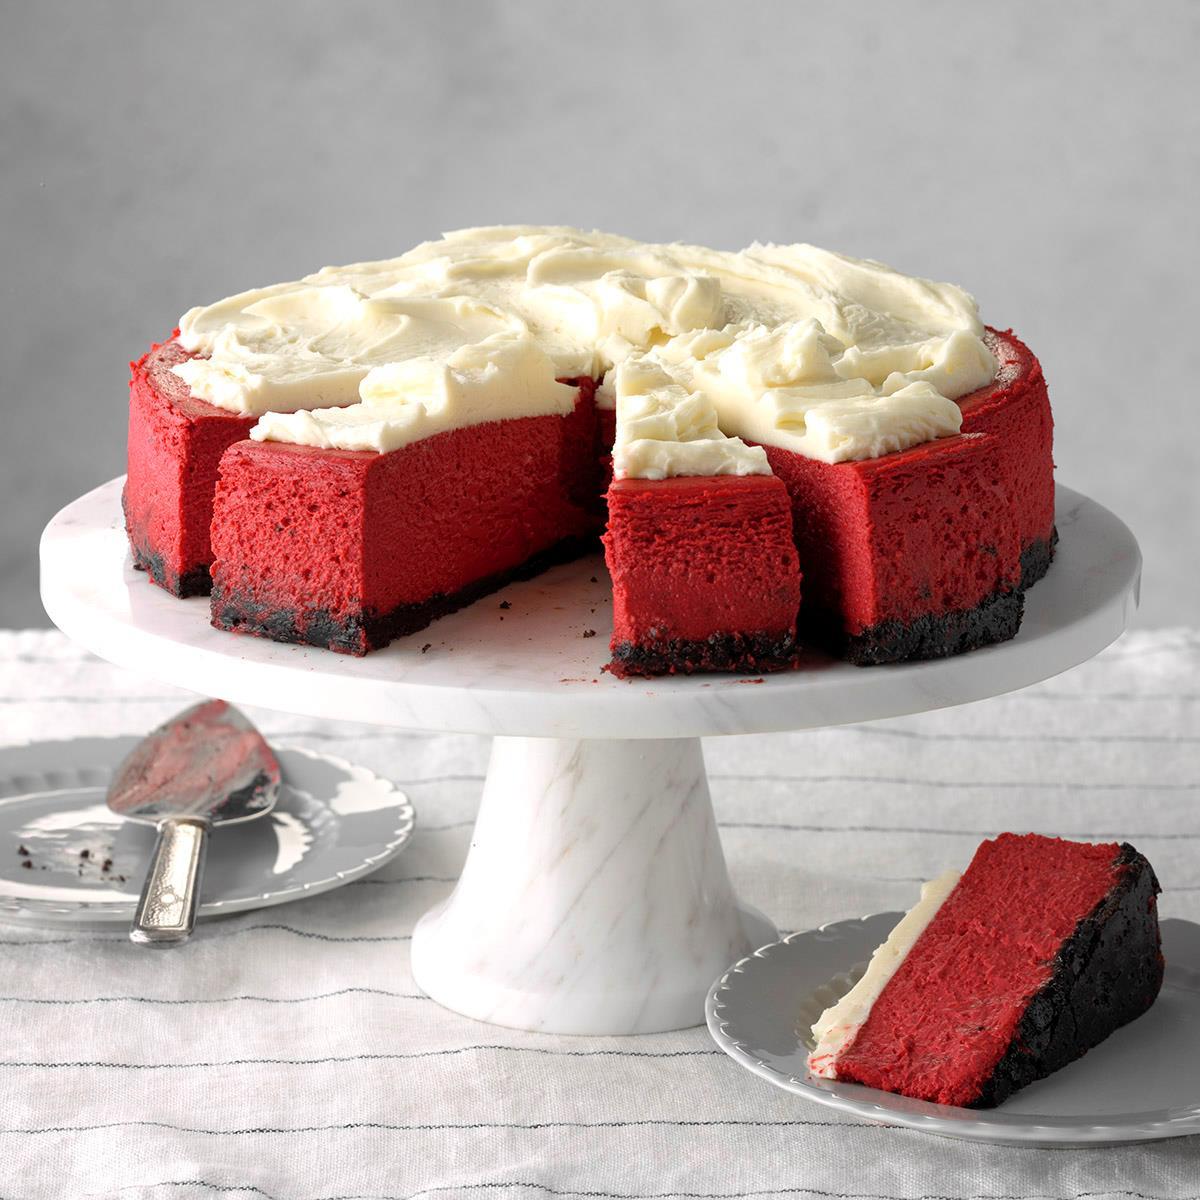 Top more than 60 red velvet cake and cheesecake best - in.daotaonec